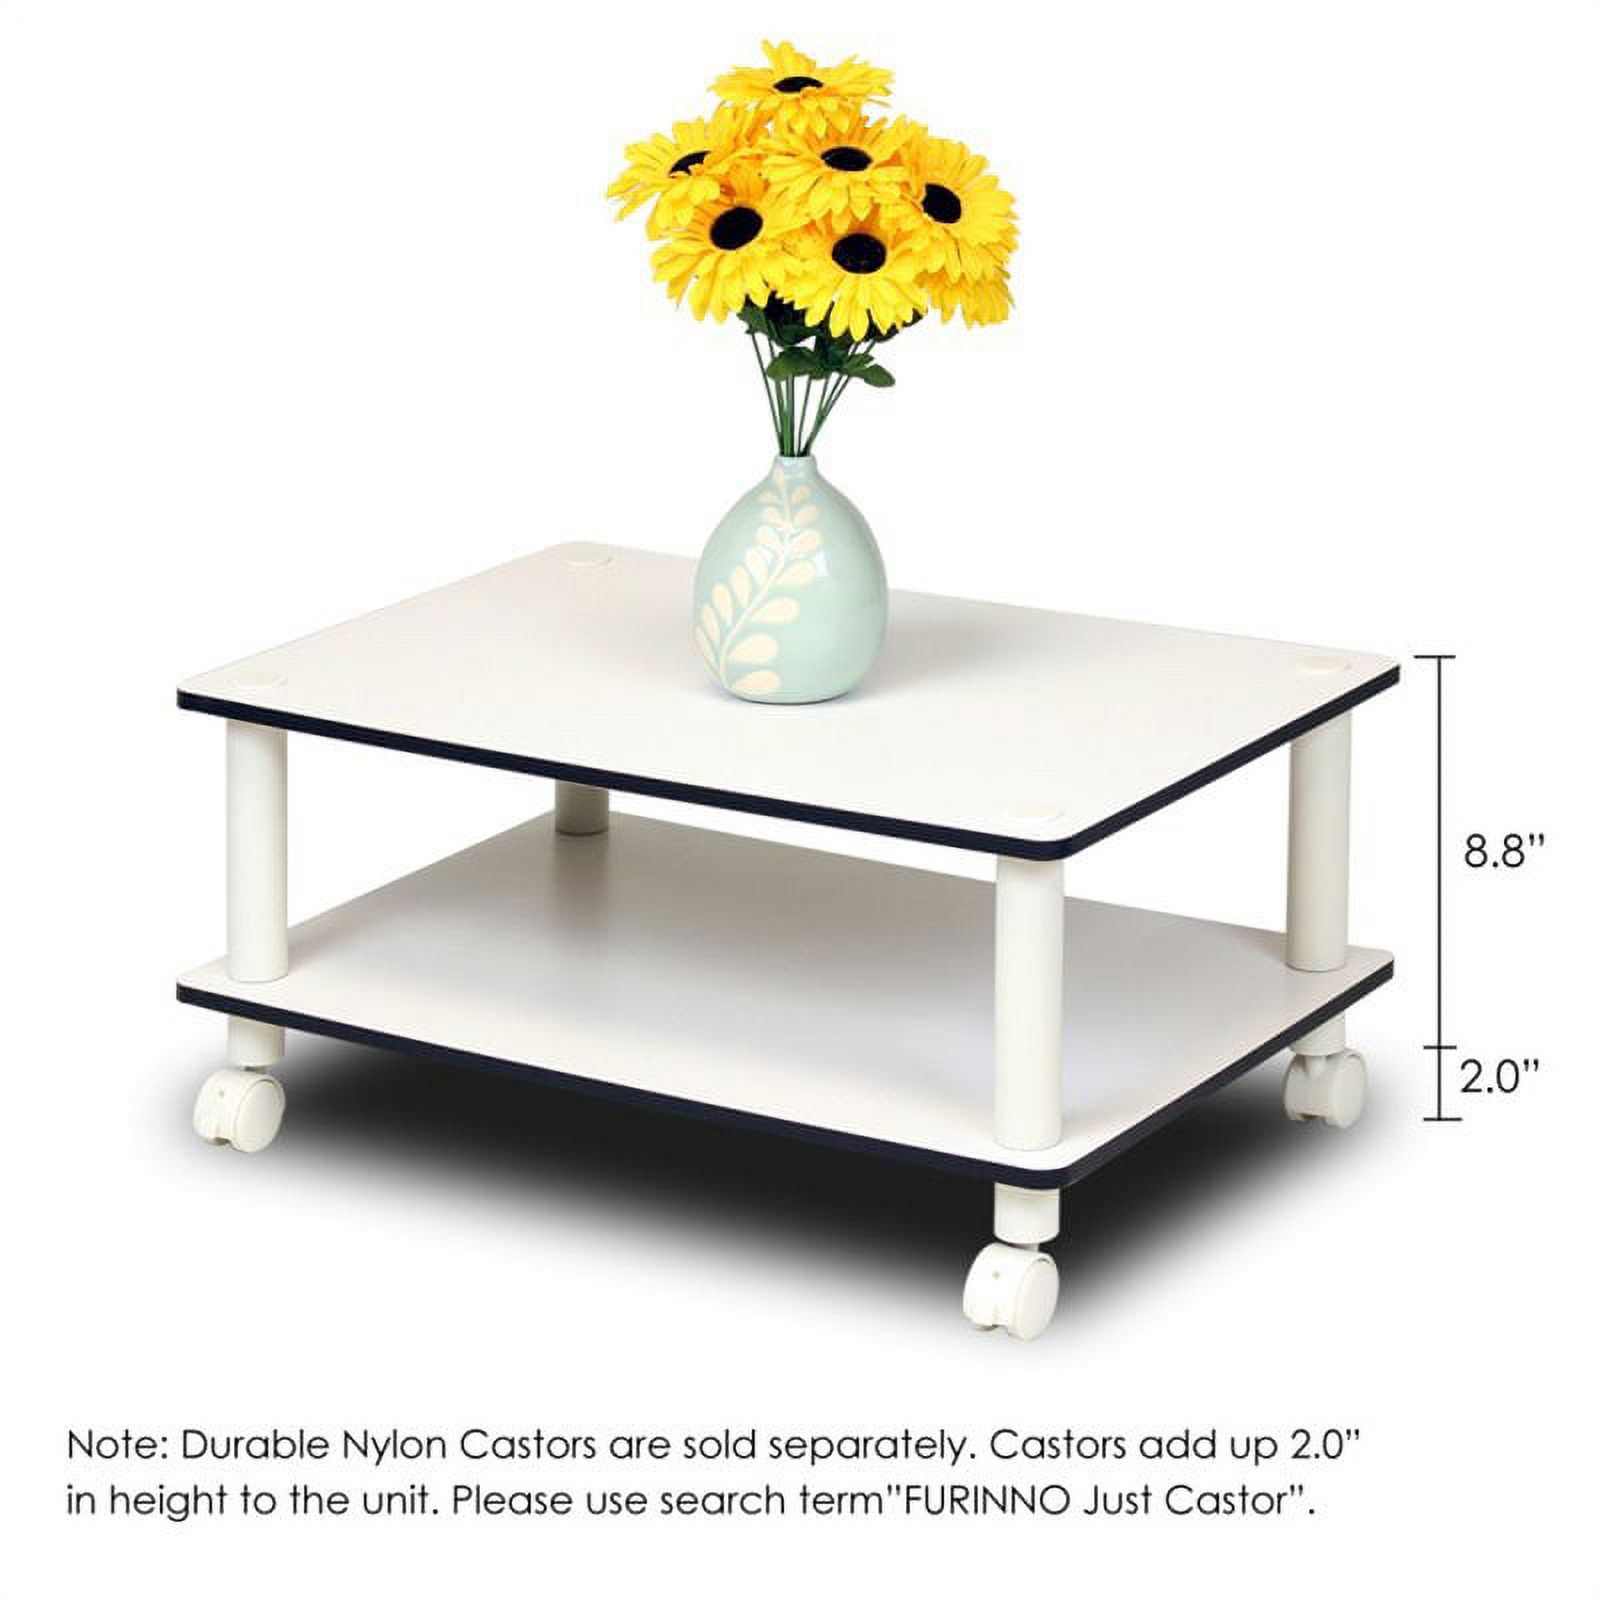 Furinno 11172 Just 2-Tier No-Tools Coffee Table, White - image 5 of 5